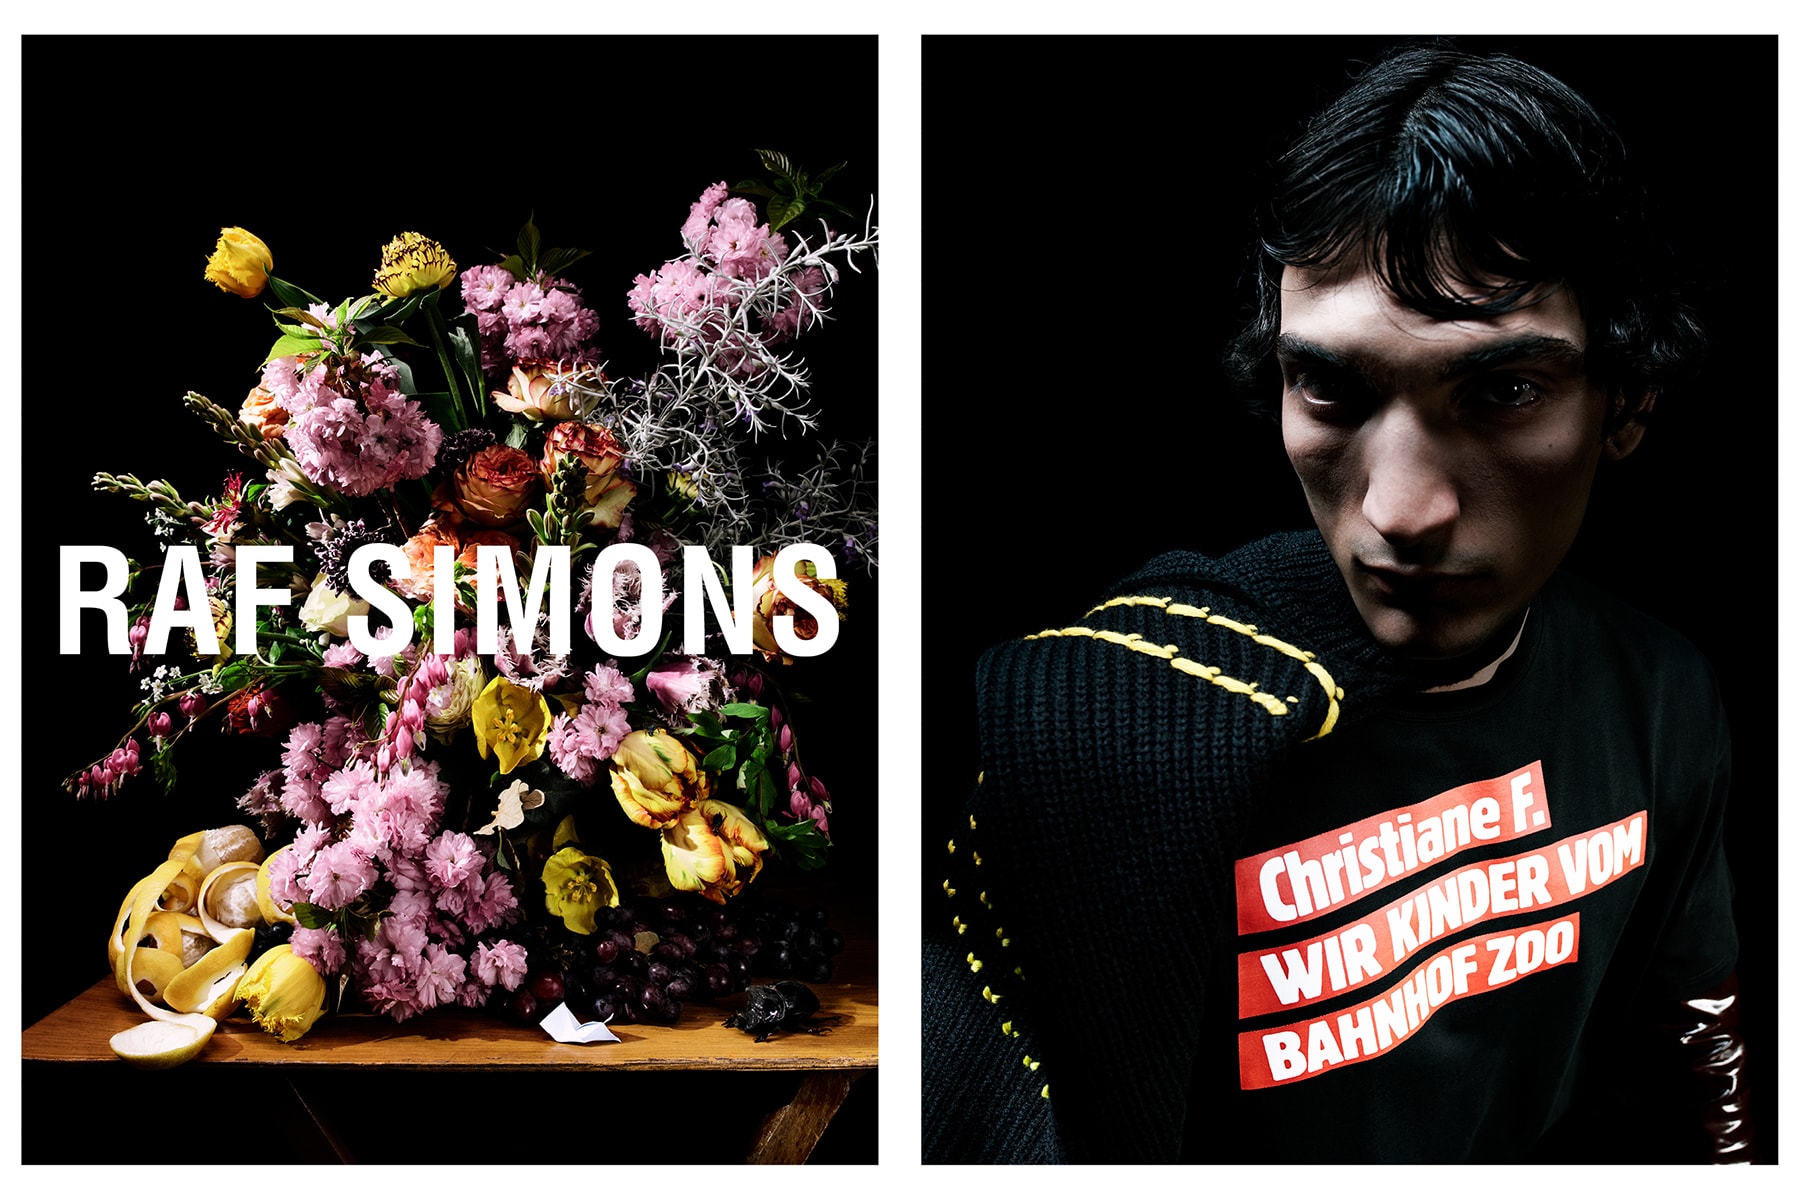 raf simons fall winter 2018 campaign advertisements imagery collection Photography Willy Vanderperre Styling Olivier Rizzo Flowers Mark Colle Model Luca Lemaire